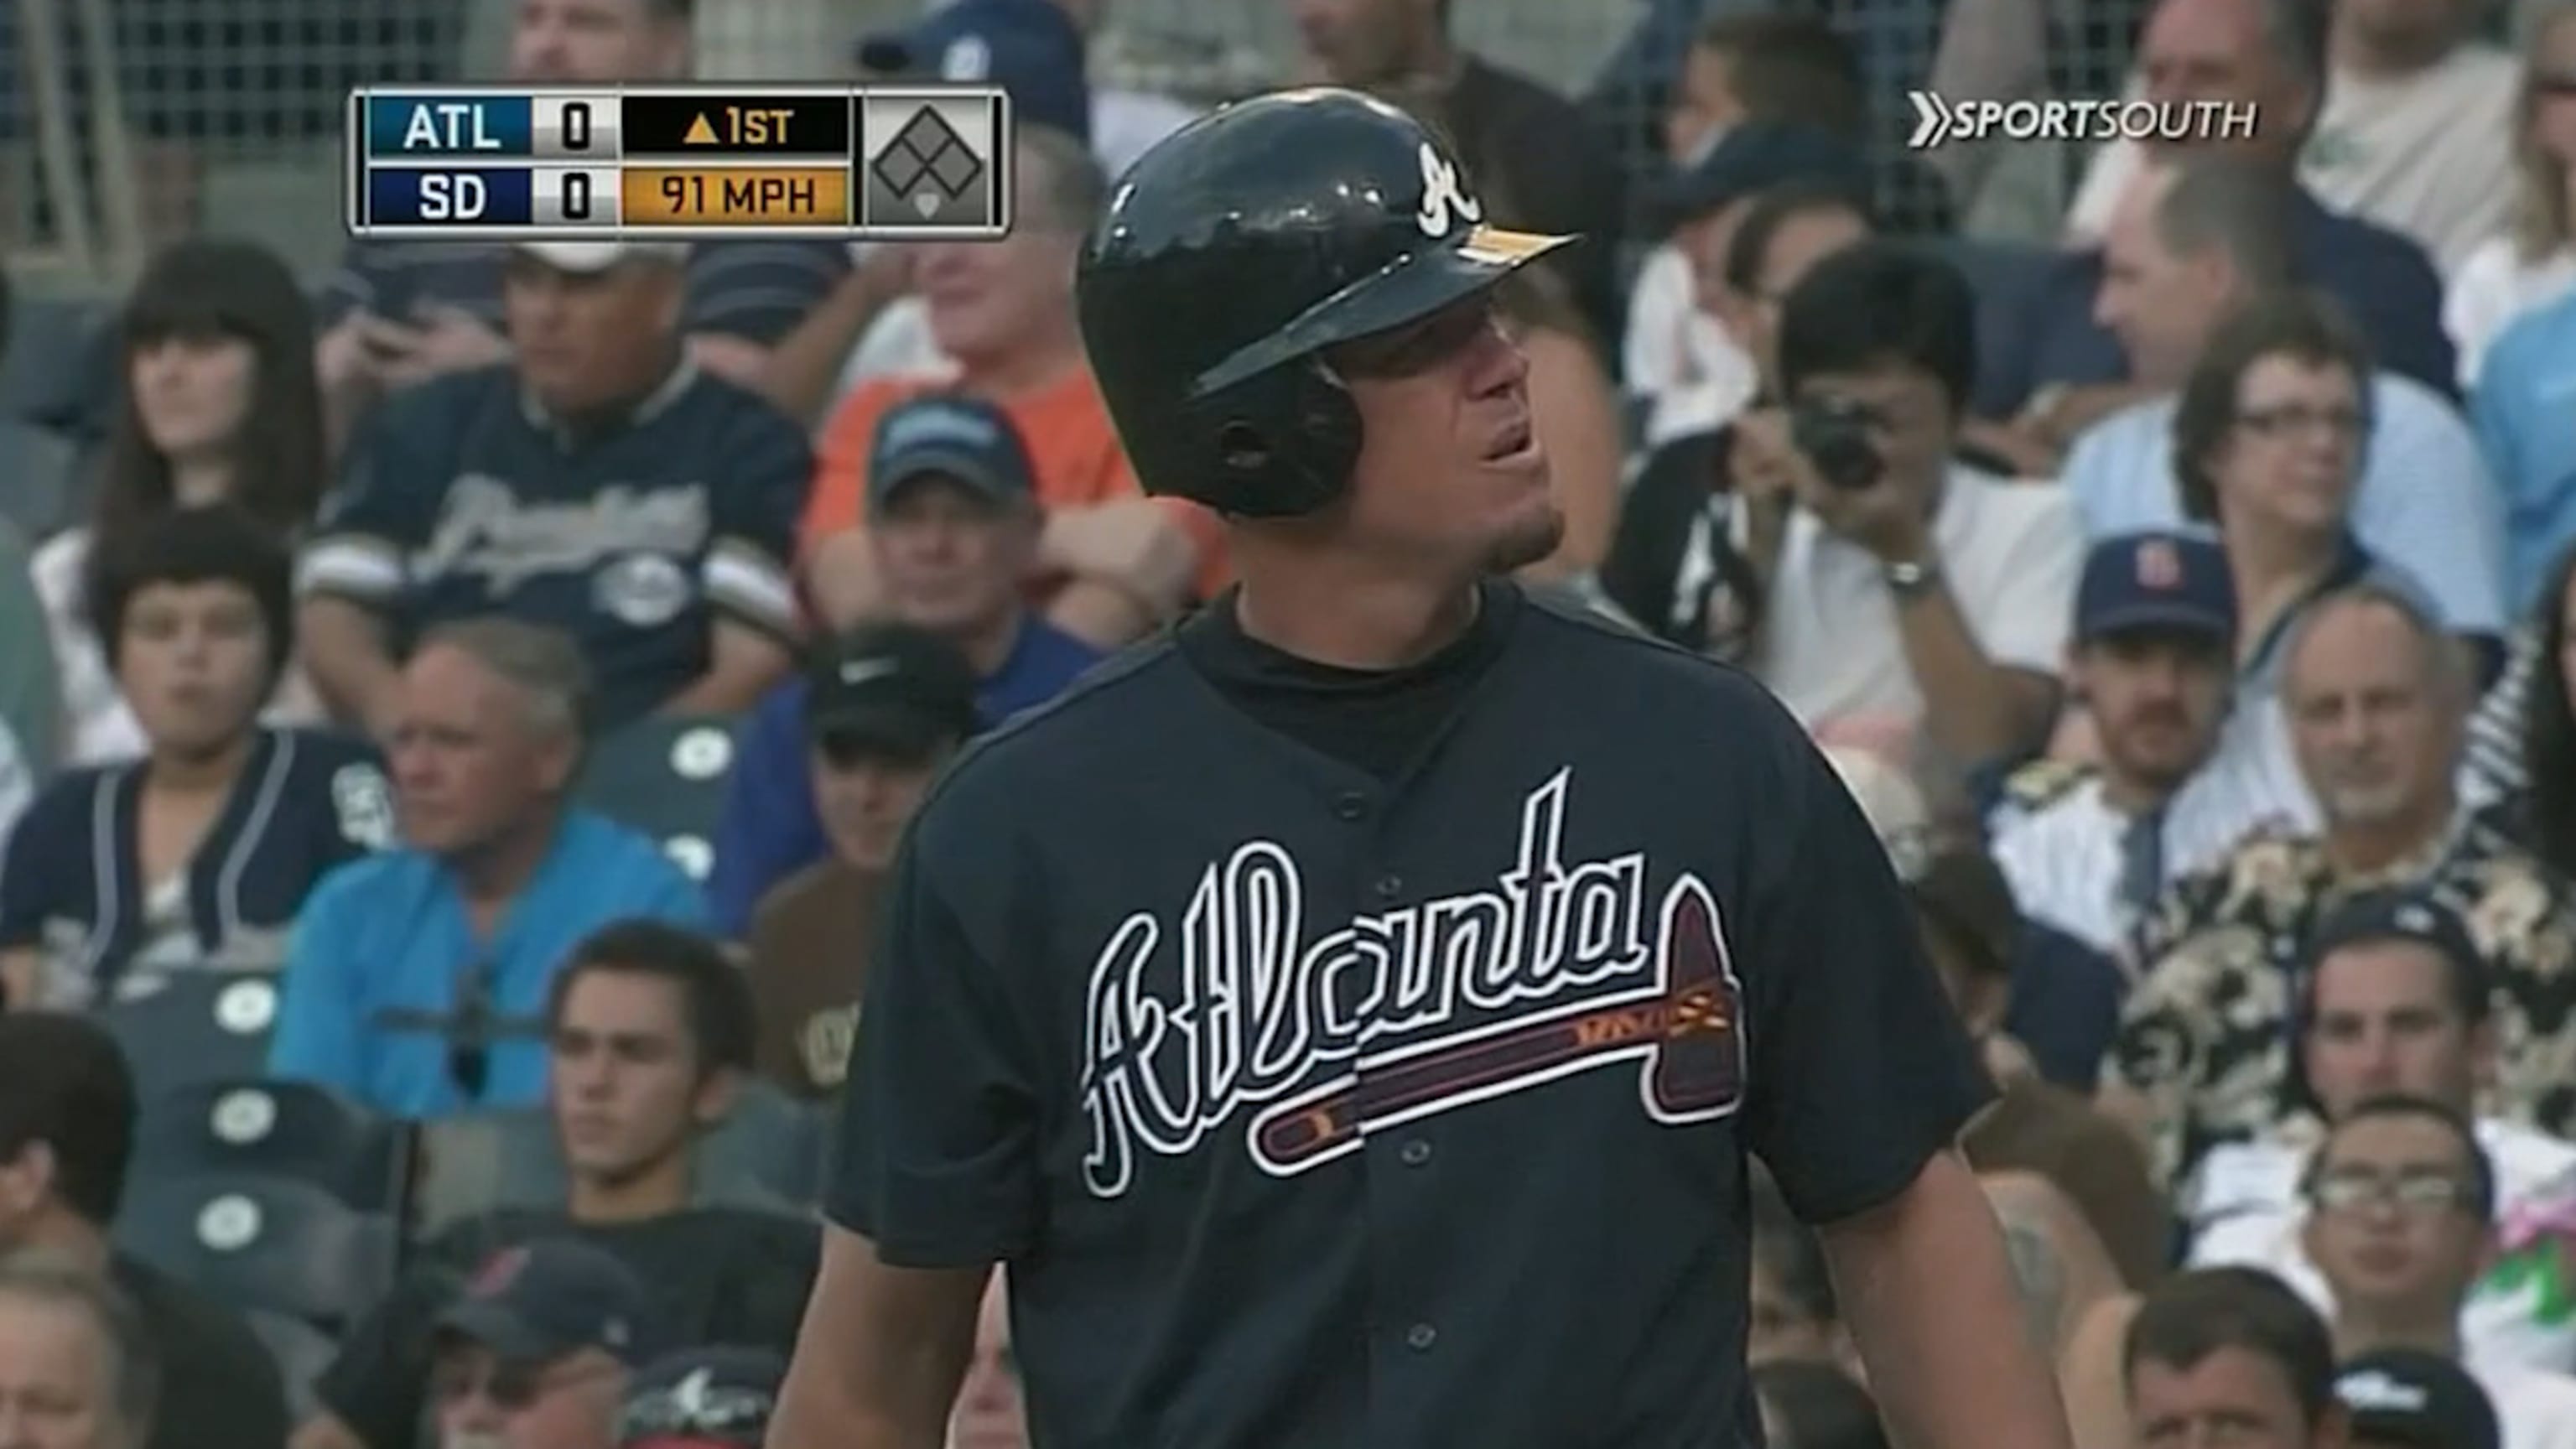 Chipper Jones trying not to strike out with third wife